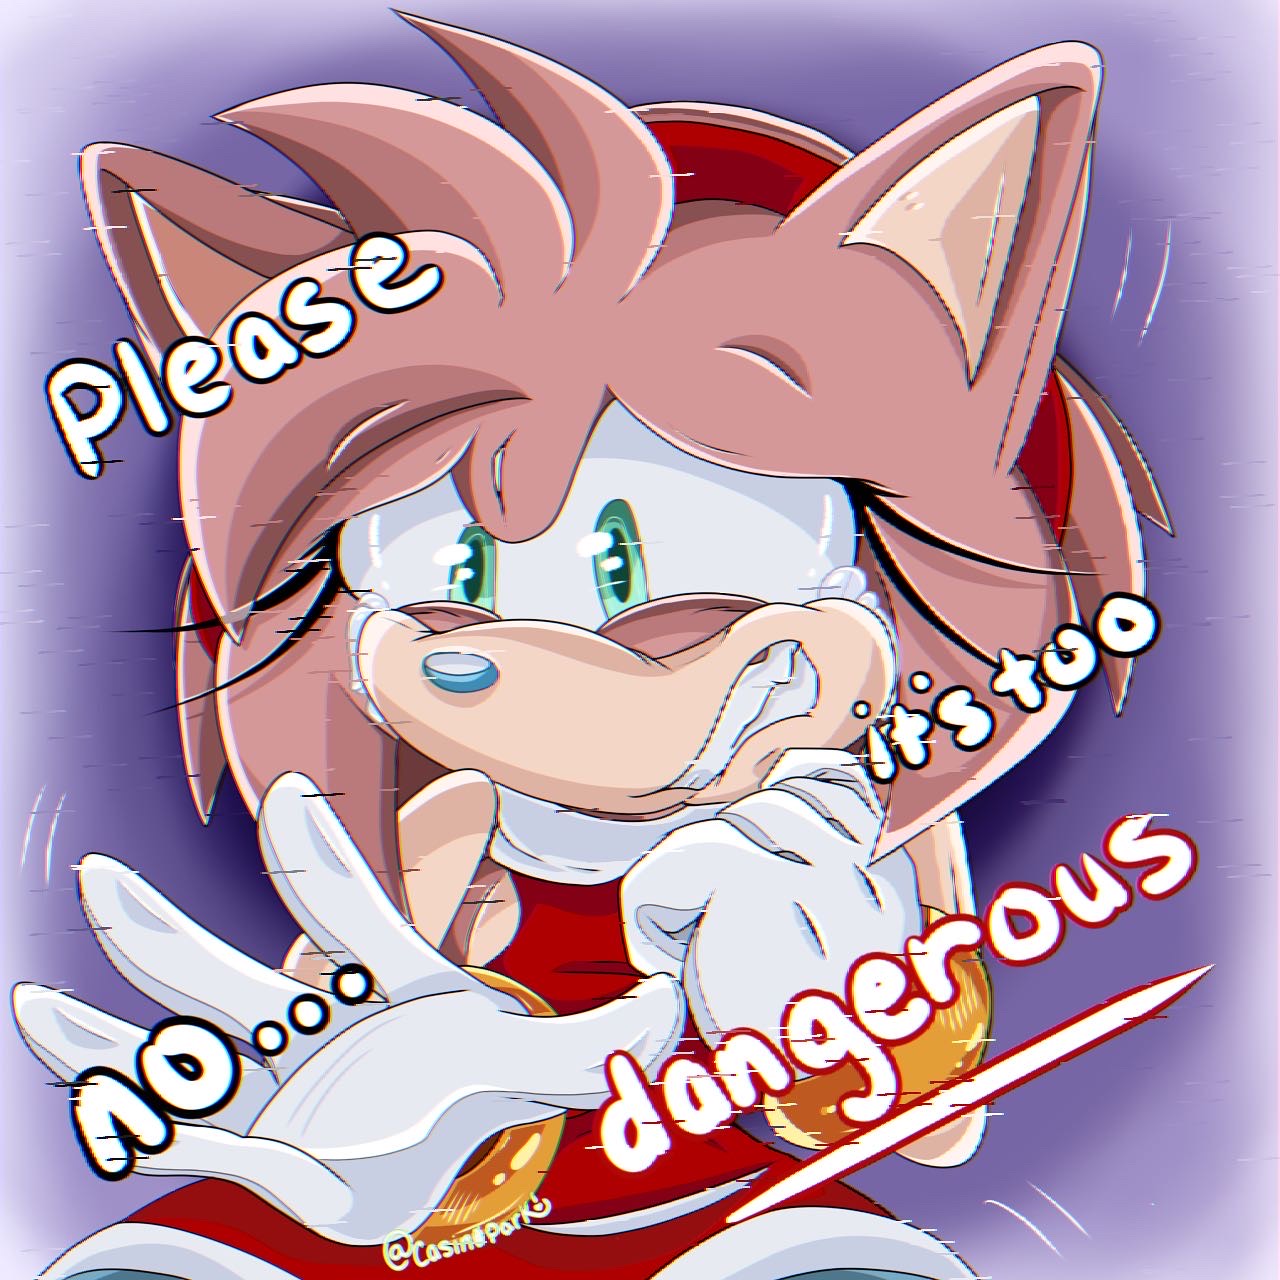 Amy Rose [sonic frontiers] by Di-Dash on DeviantArt